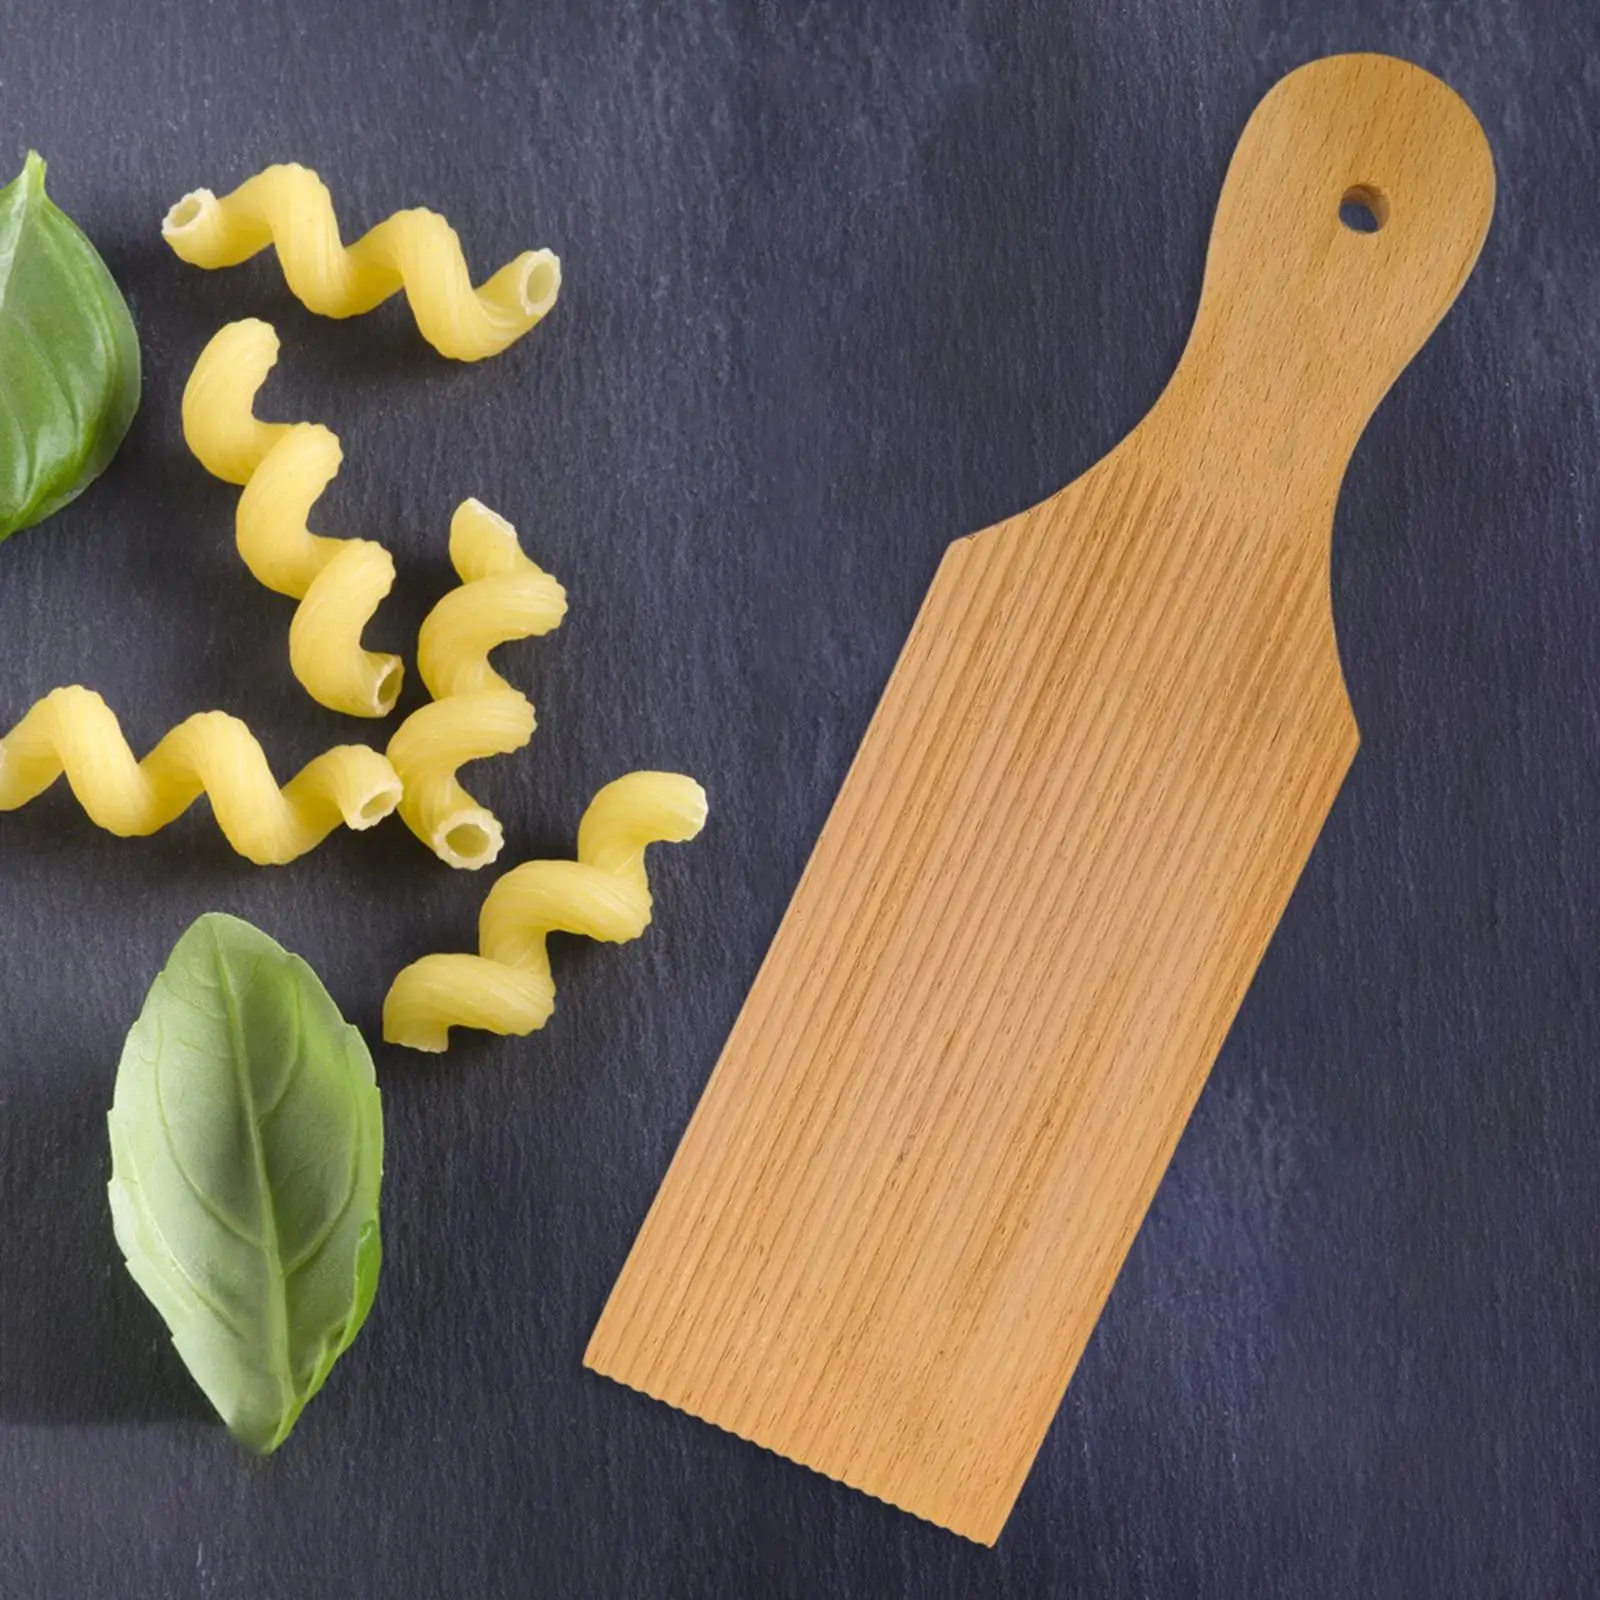 Gnocchi Pasta Boards Pasta Making Tools Roller Wooden Kitchen Utensil Spiral Noodle Tool for Noodle Making Pasta and Butter Home